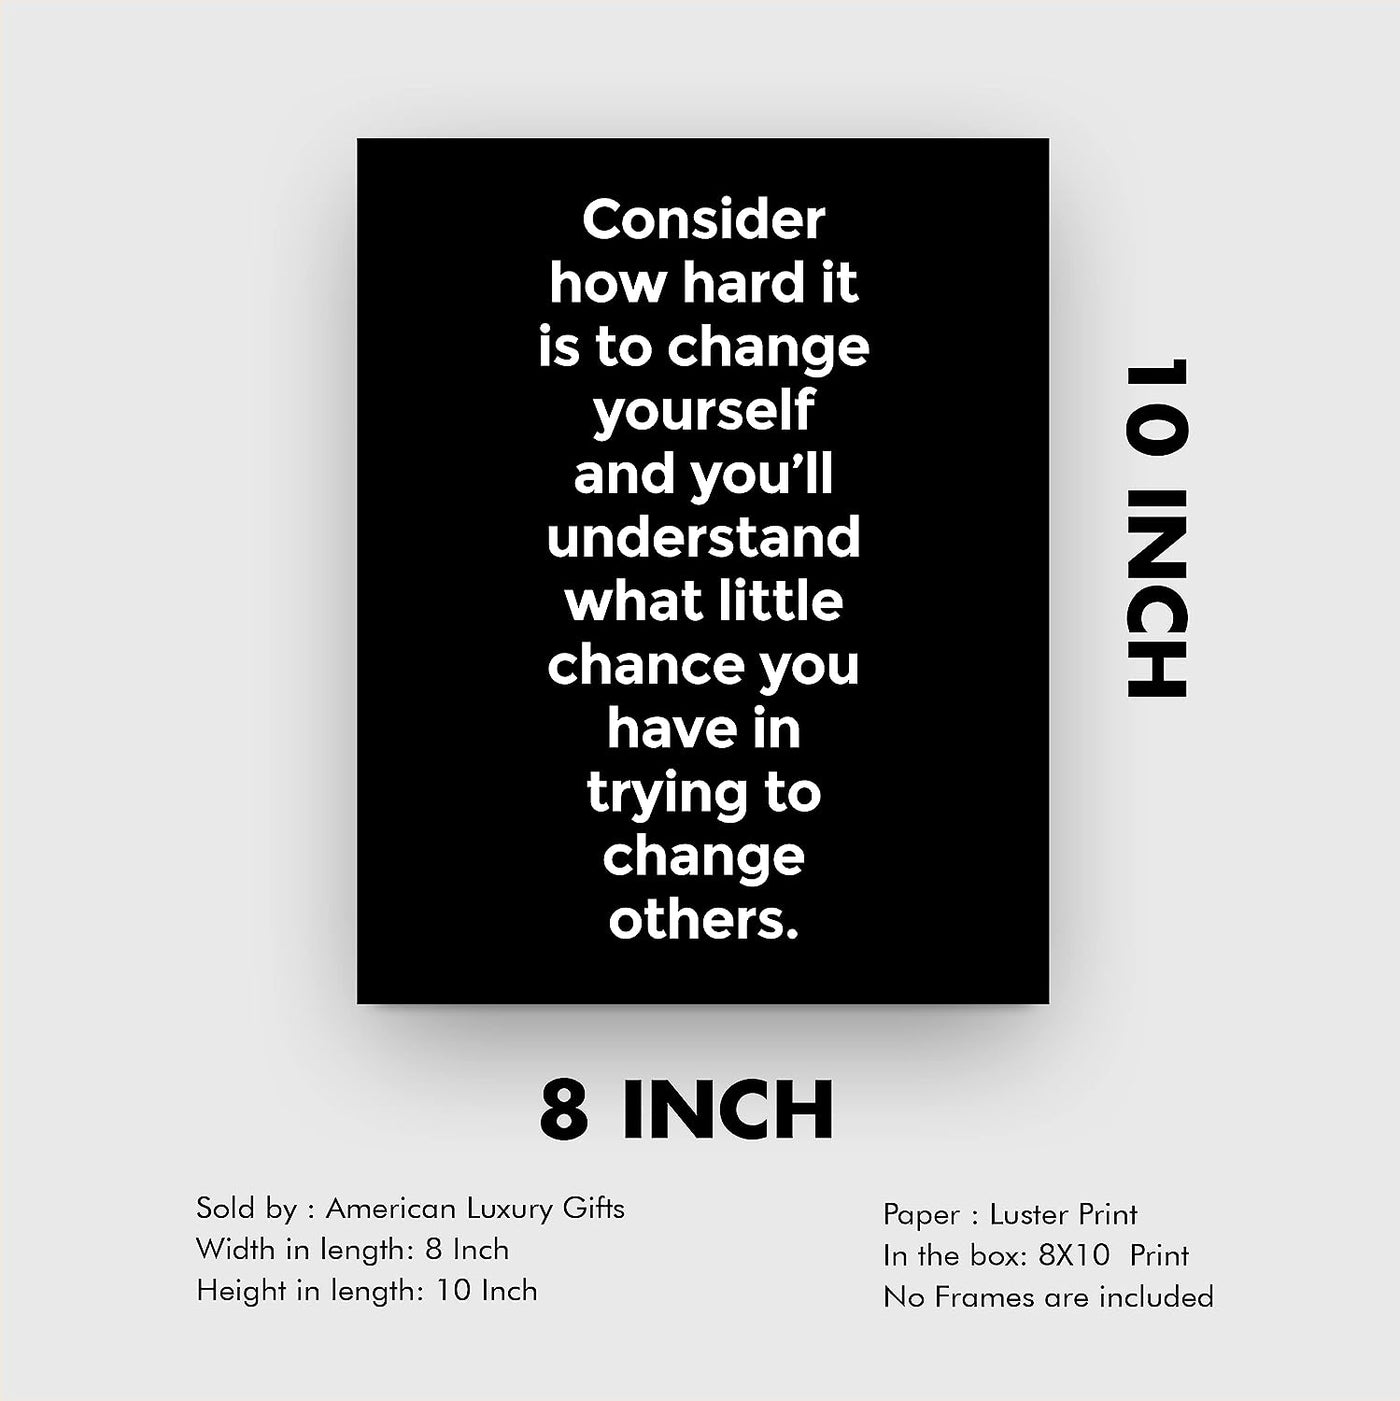 Consider How Hard It Is to Change Yourself Inspirational Wall Decor -8 x 10" Modern Typographic Art Print-Ready to Frame. Perfect Home-Office-Work-Classroom Decor. Great Advice & Life Lesson!